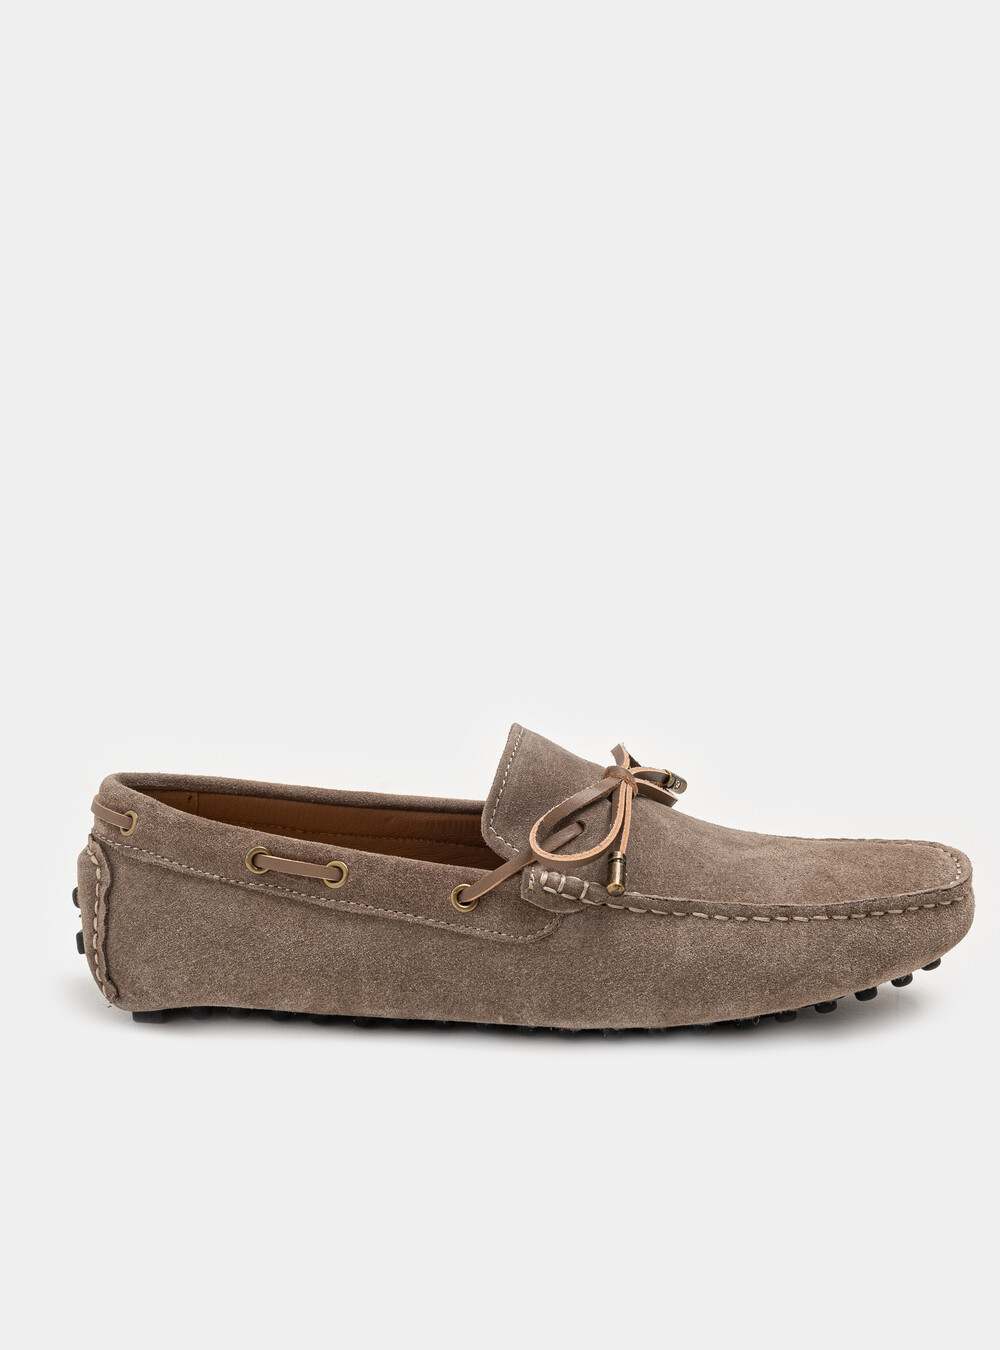 Suede boat moccasins